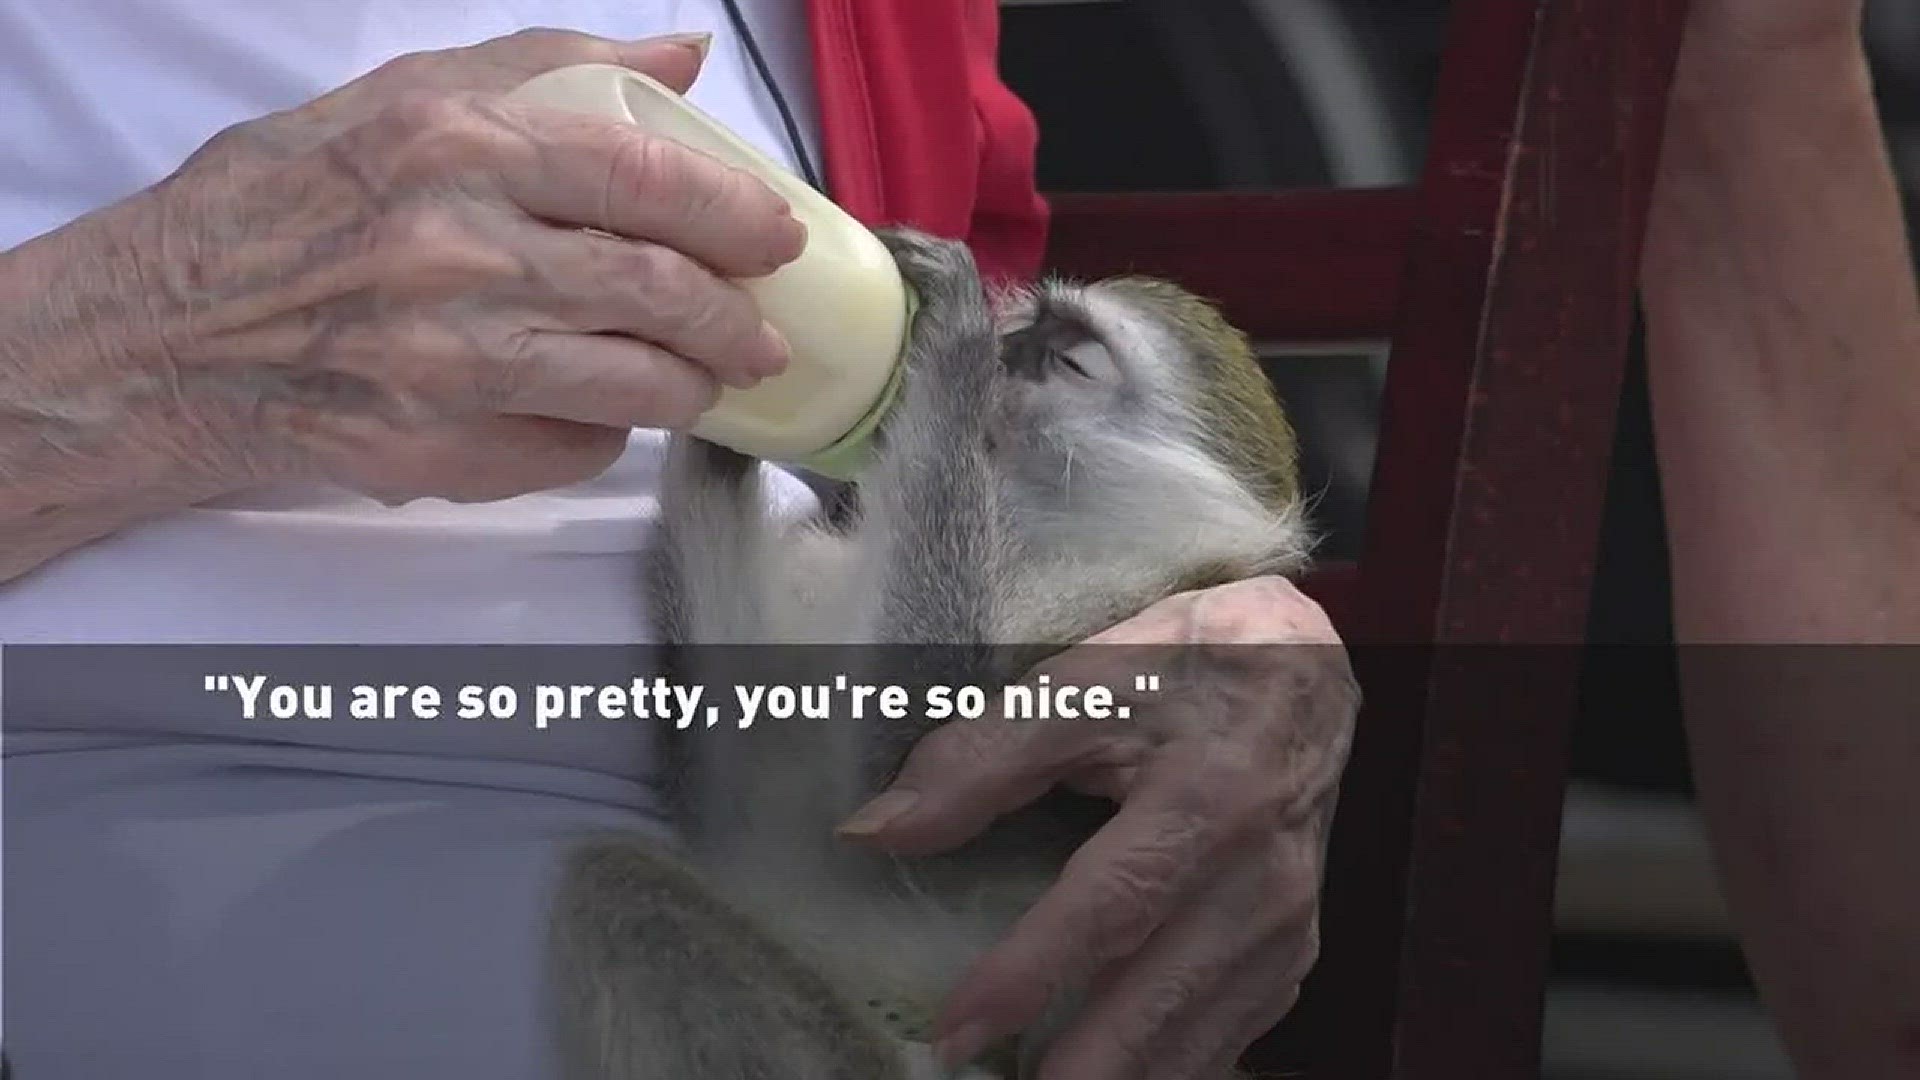 Dying woman meets a monkey